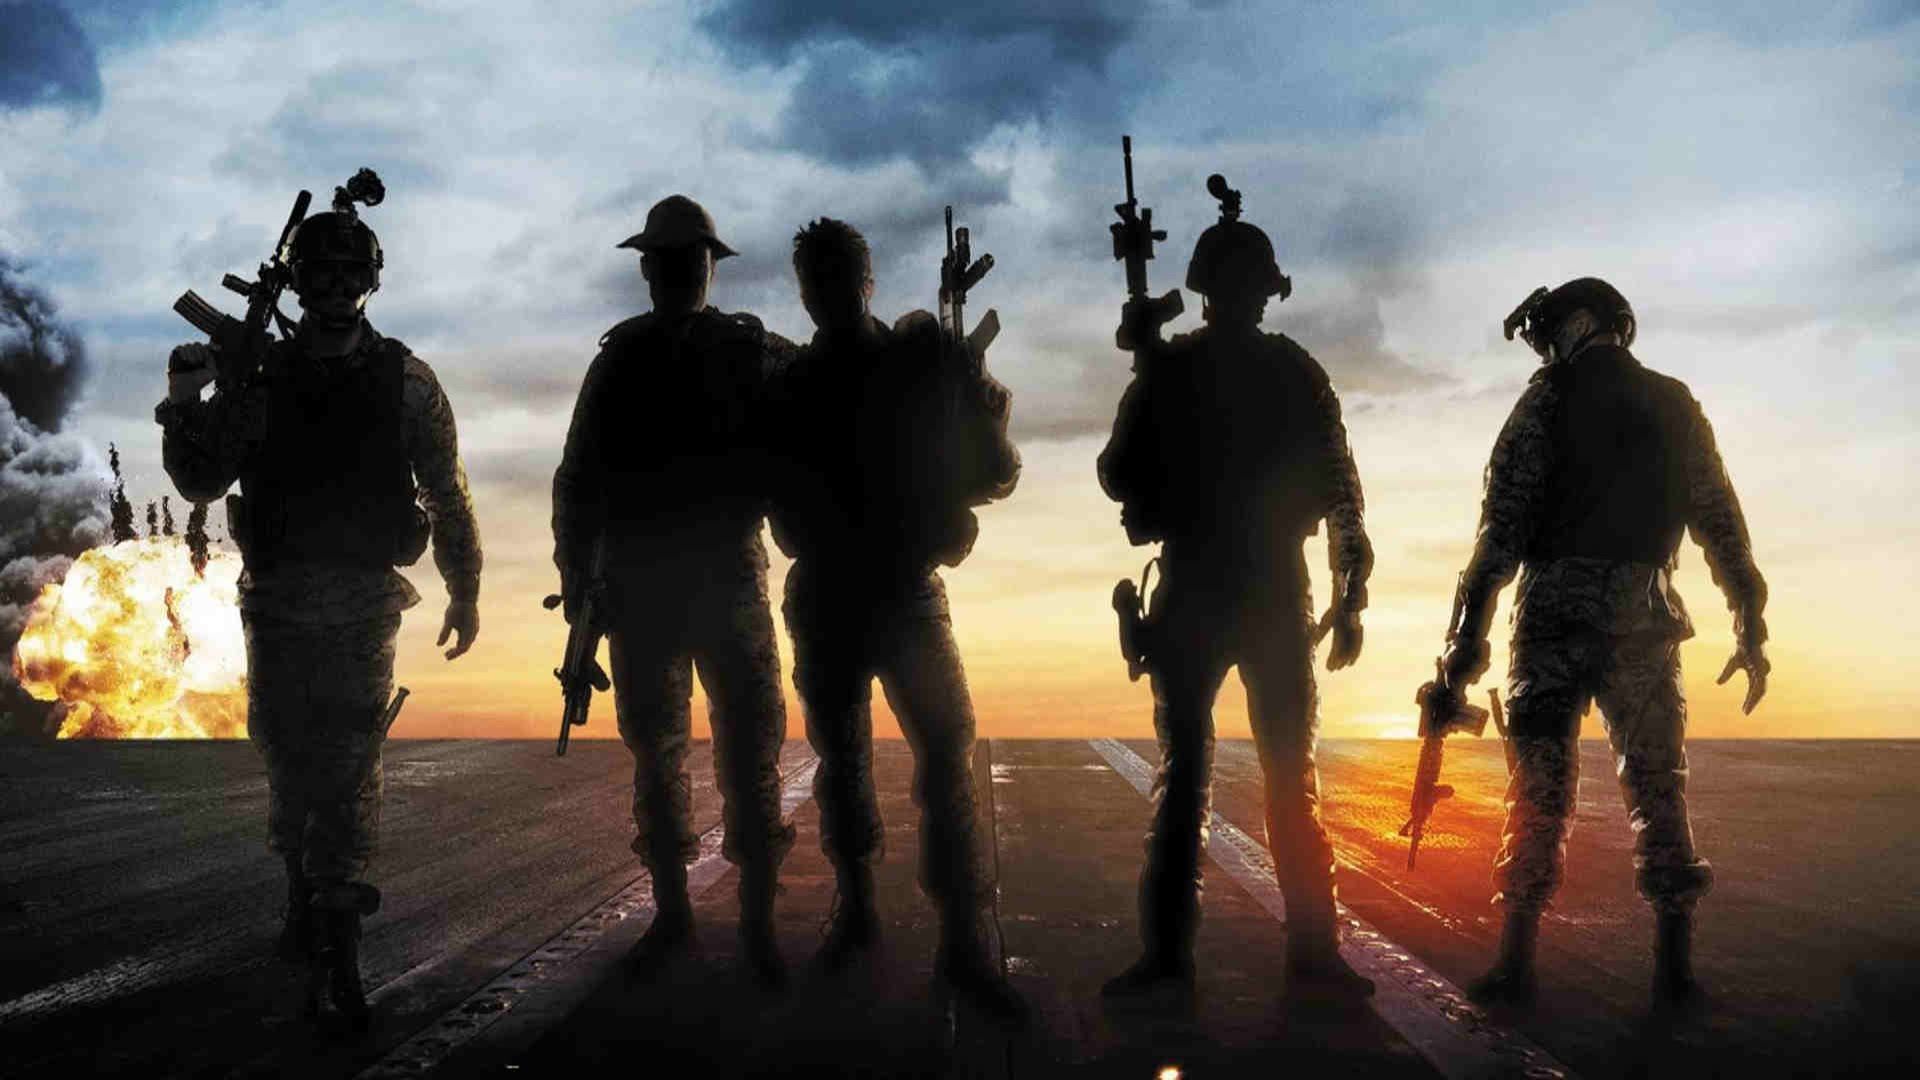 Us Military Special Forces Wallpaper Free Us Military Special Forces Background